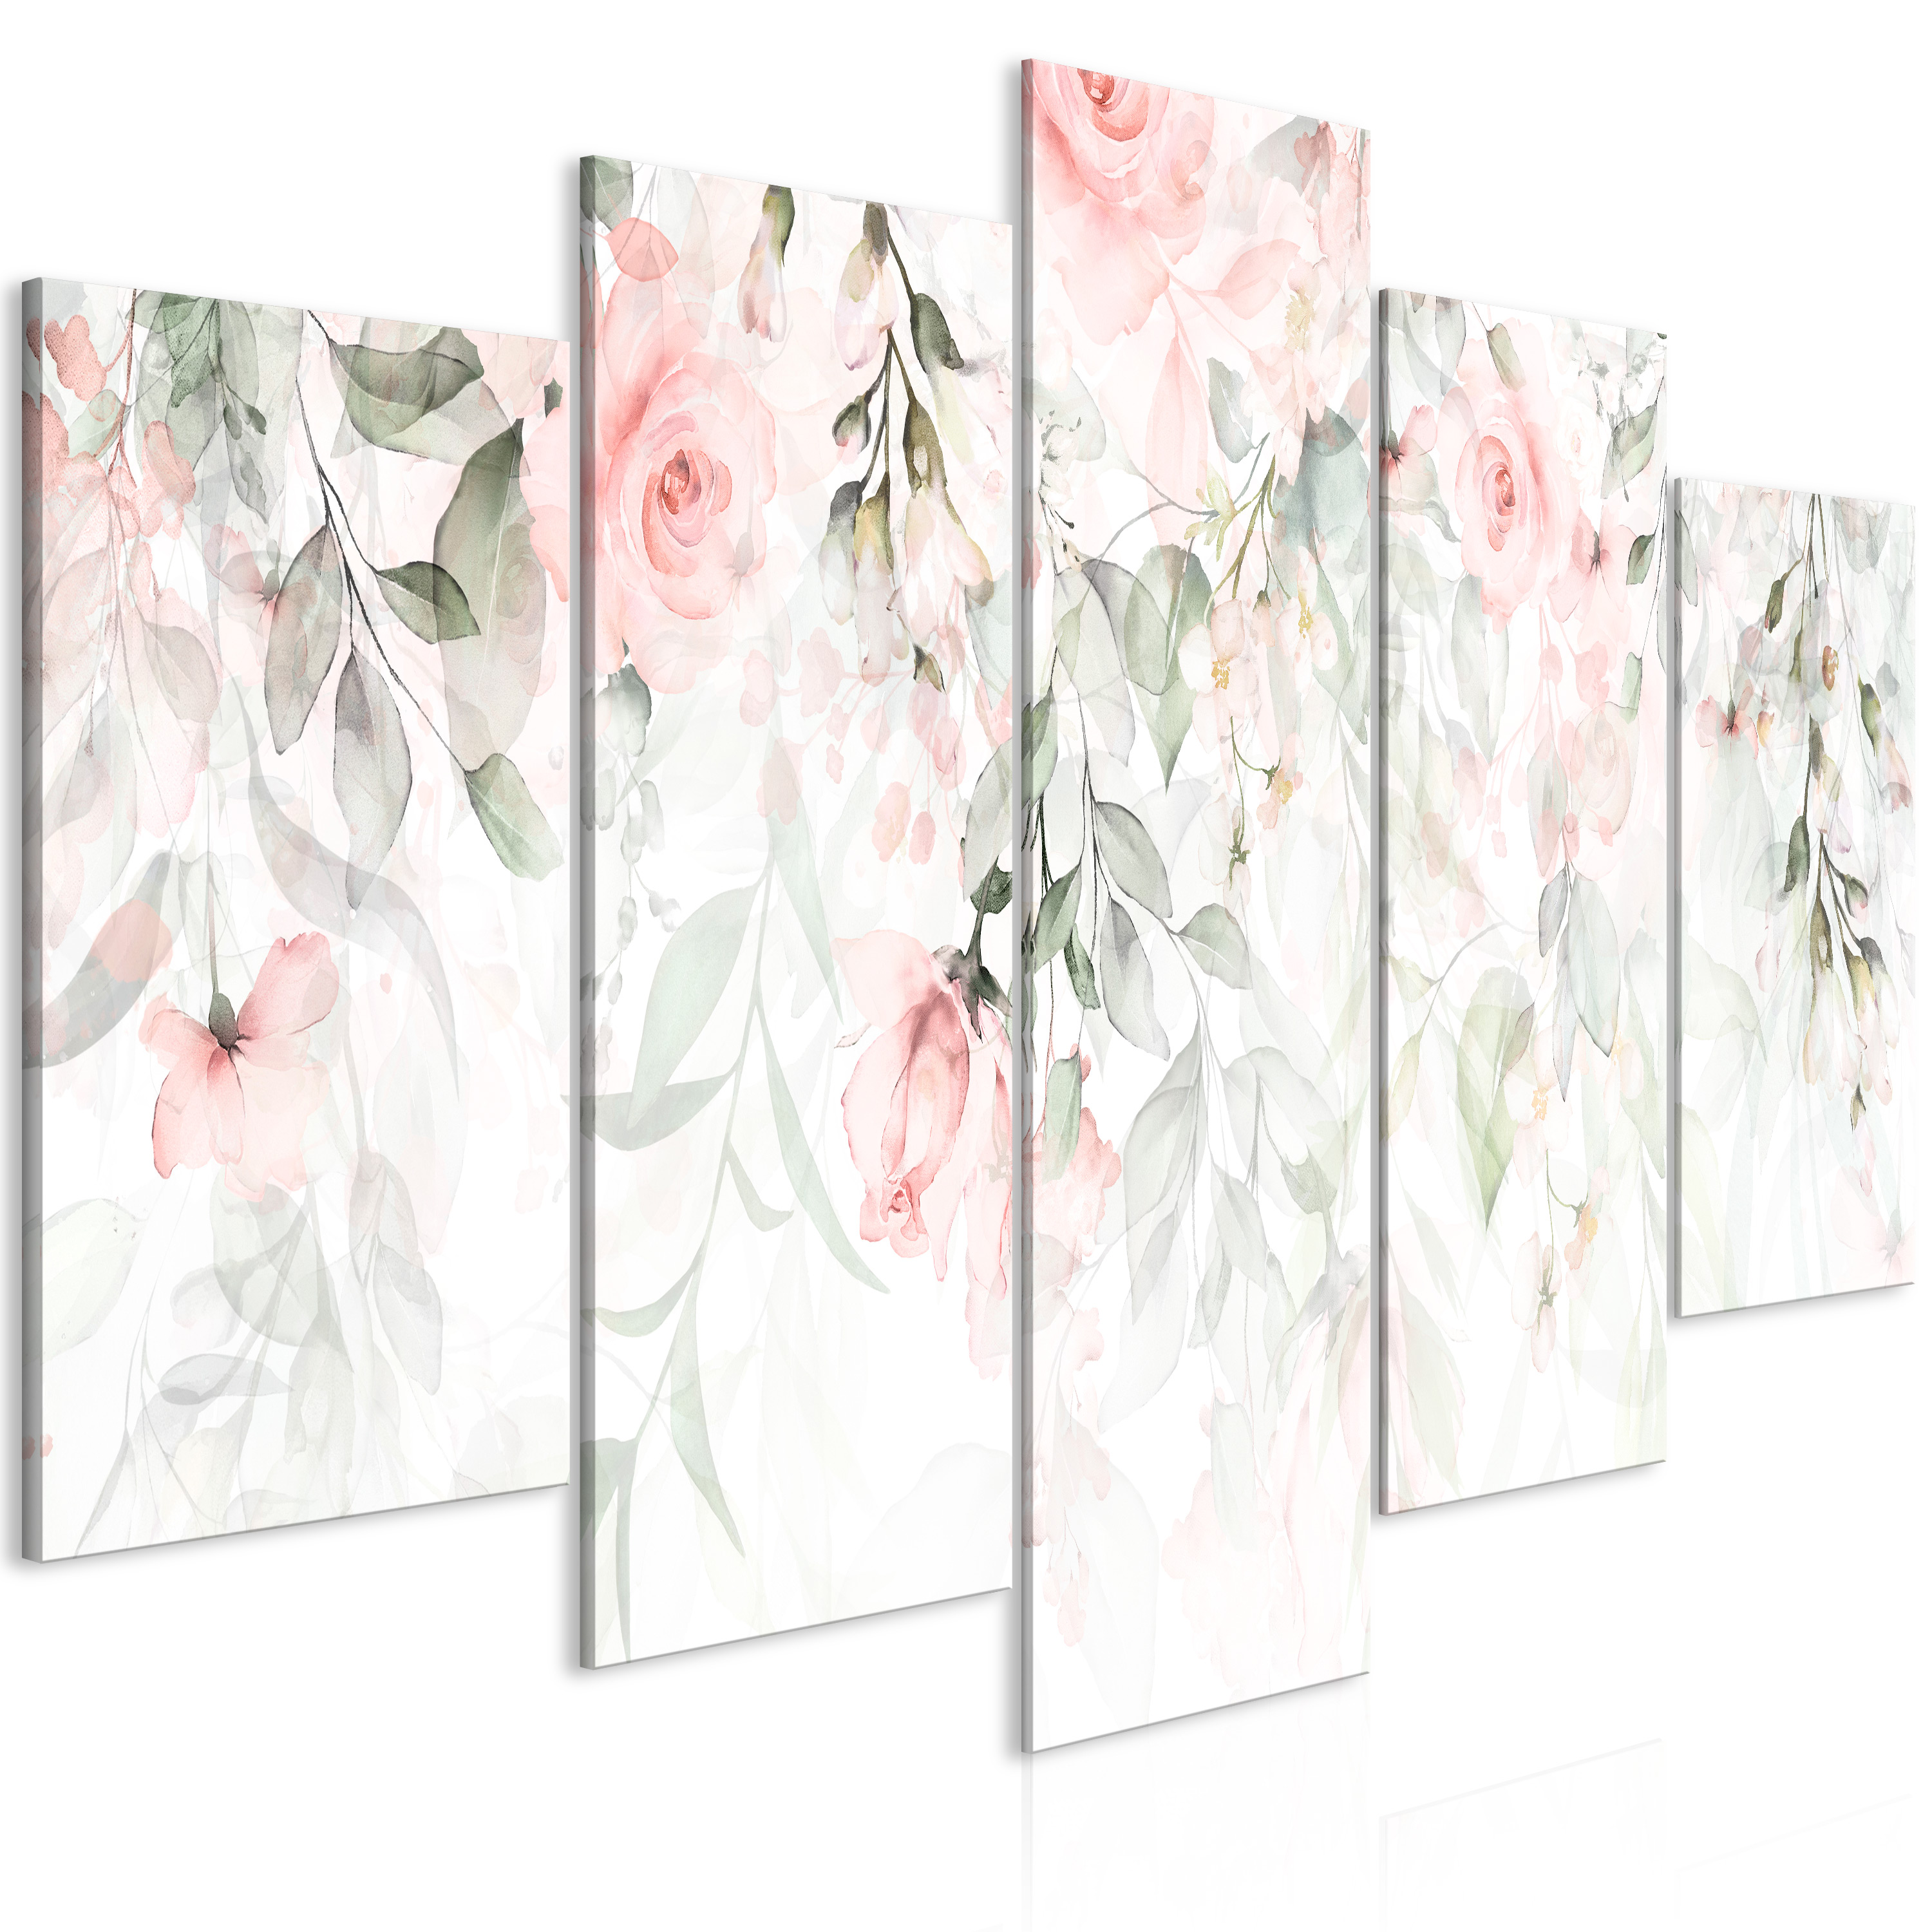 Wandbild - Waterfall of Roses (5 Parts) Wide - First Variant